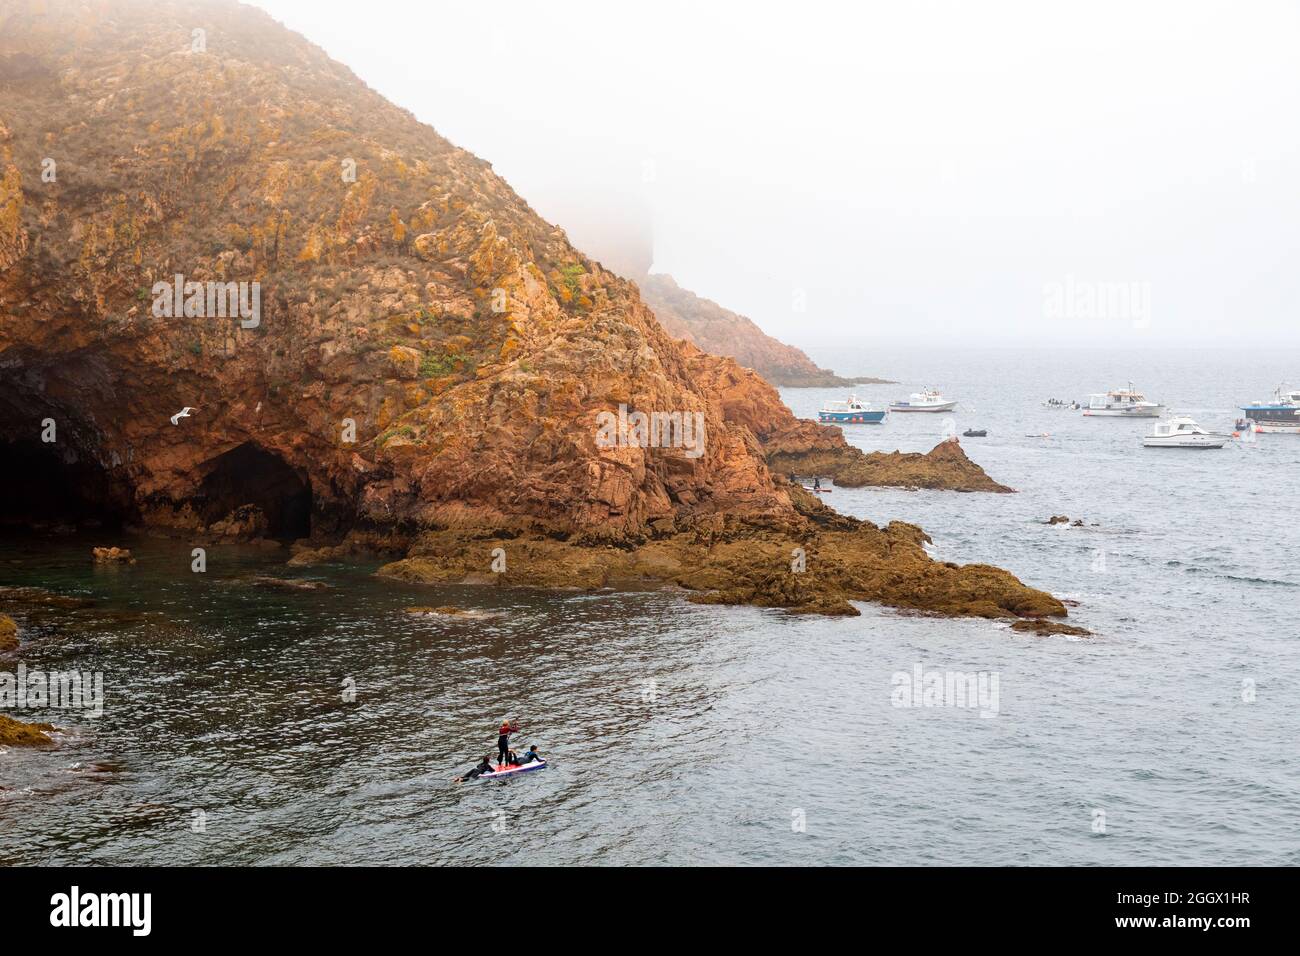 Young boys paddling in Berlenga Grande island, the largest island in the Berlengas archipelago, off the coast of Peniche, Portugal. Stock Photo